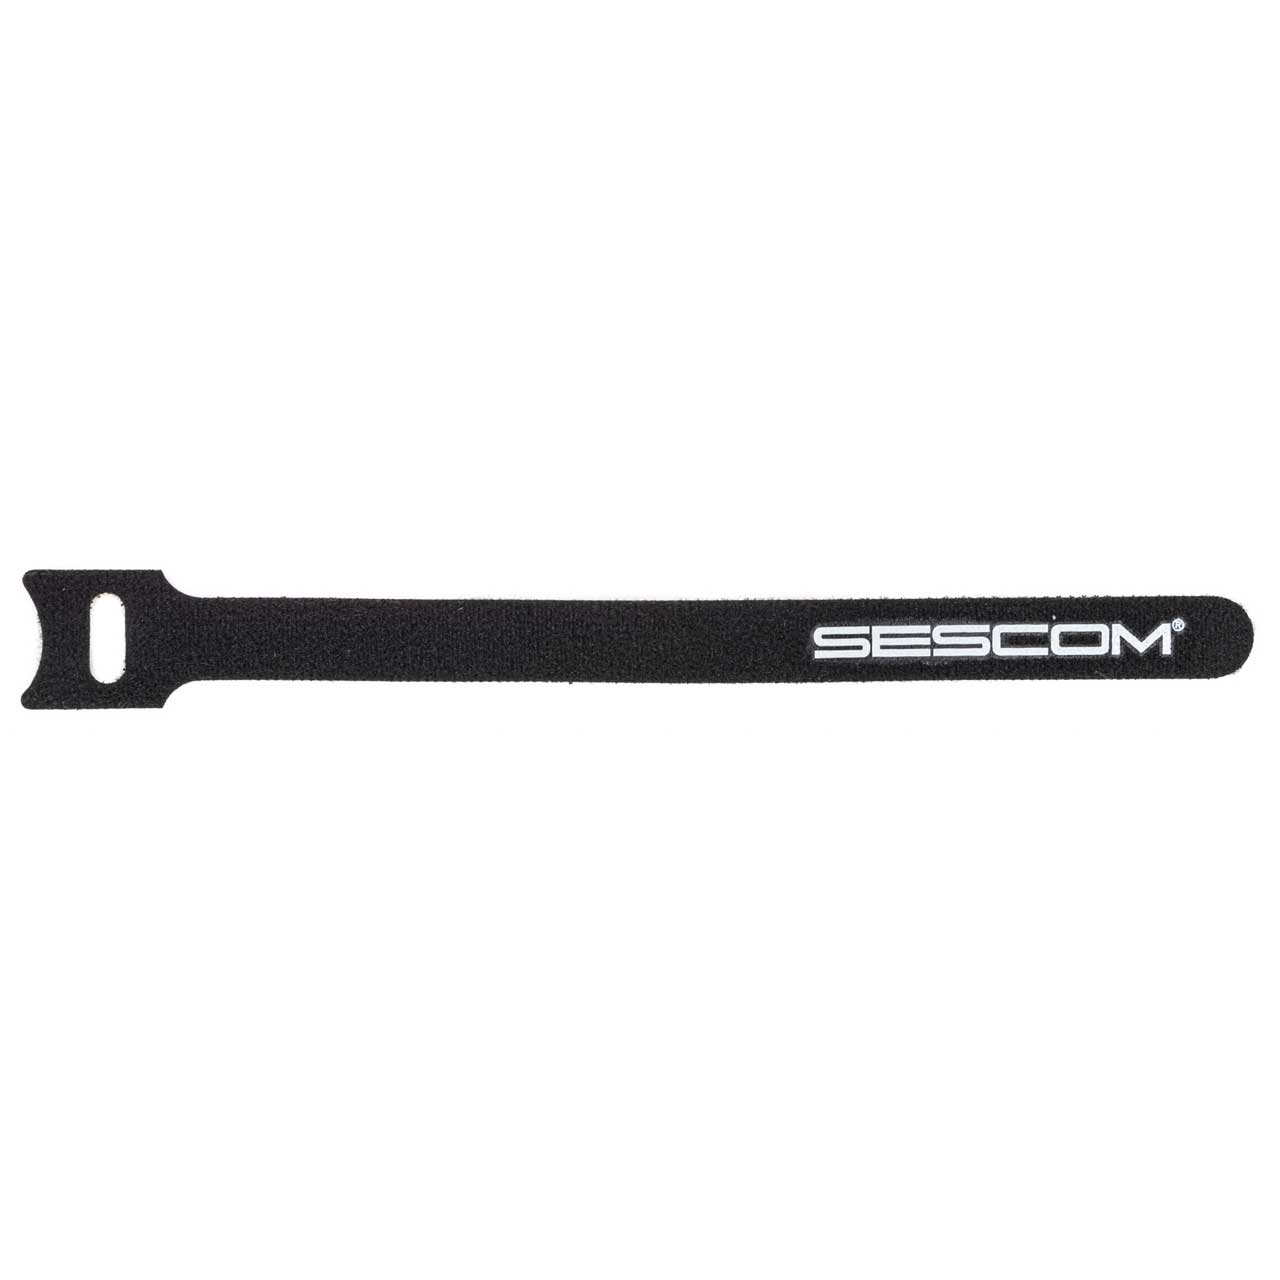 Sescom Hook and Loop Cable Wrap 12mm x 180mm Black with White Logo - 250 Pack SES-HKNLP-250PK